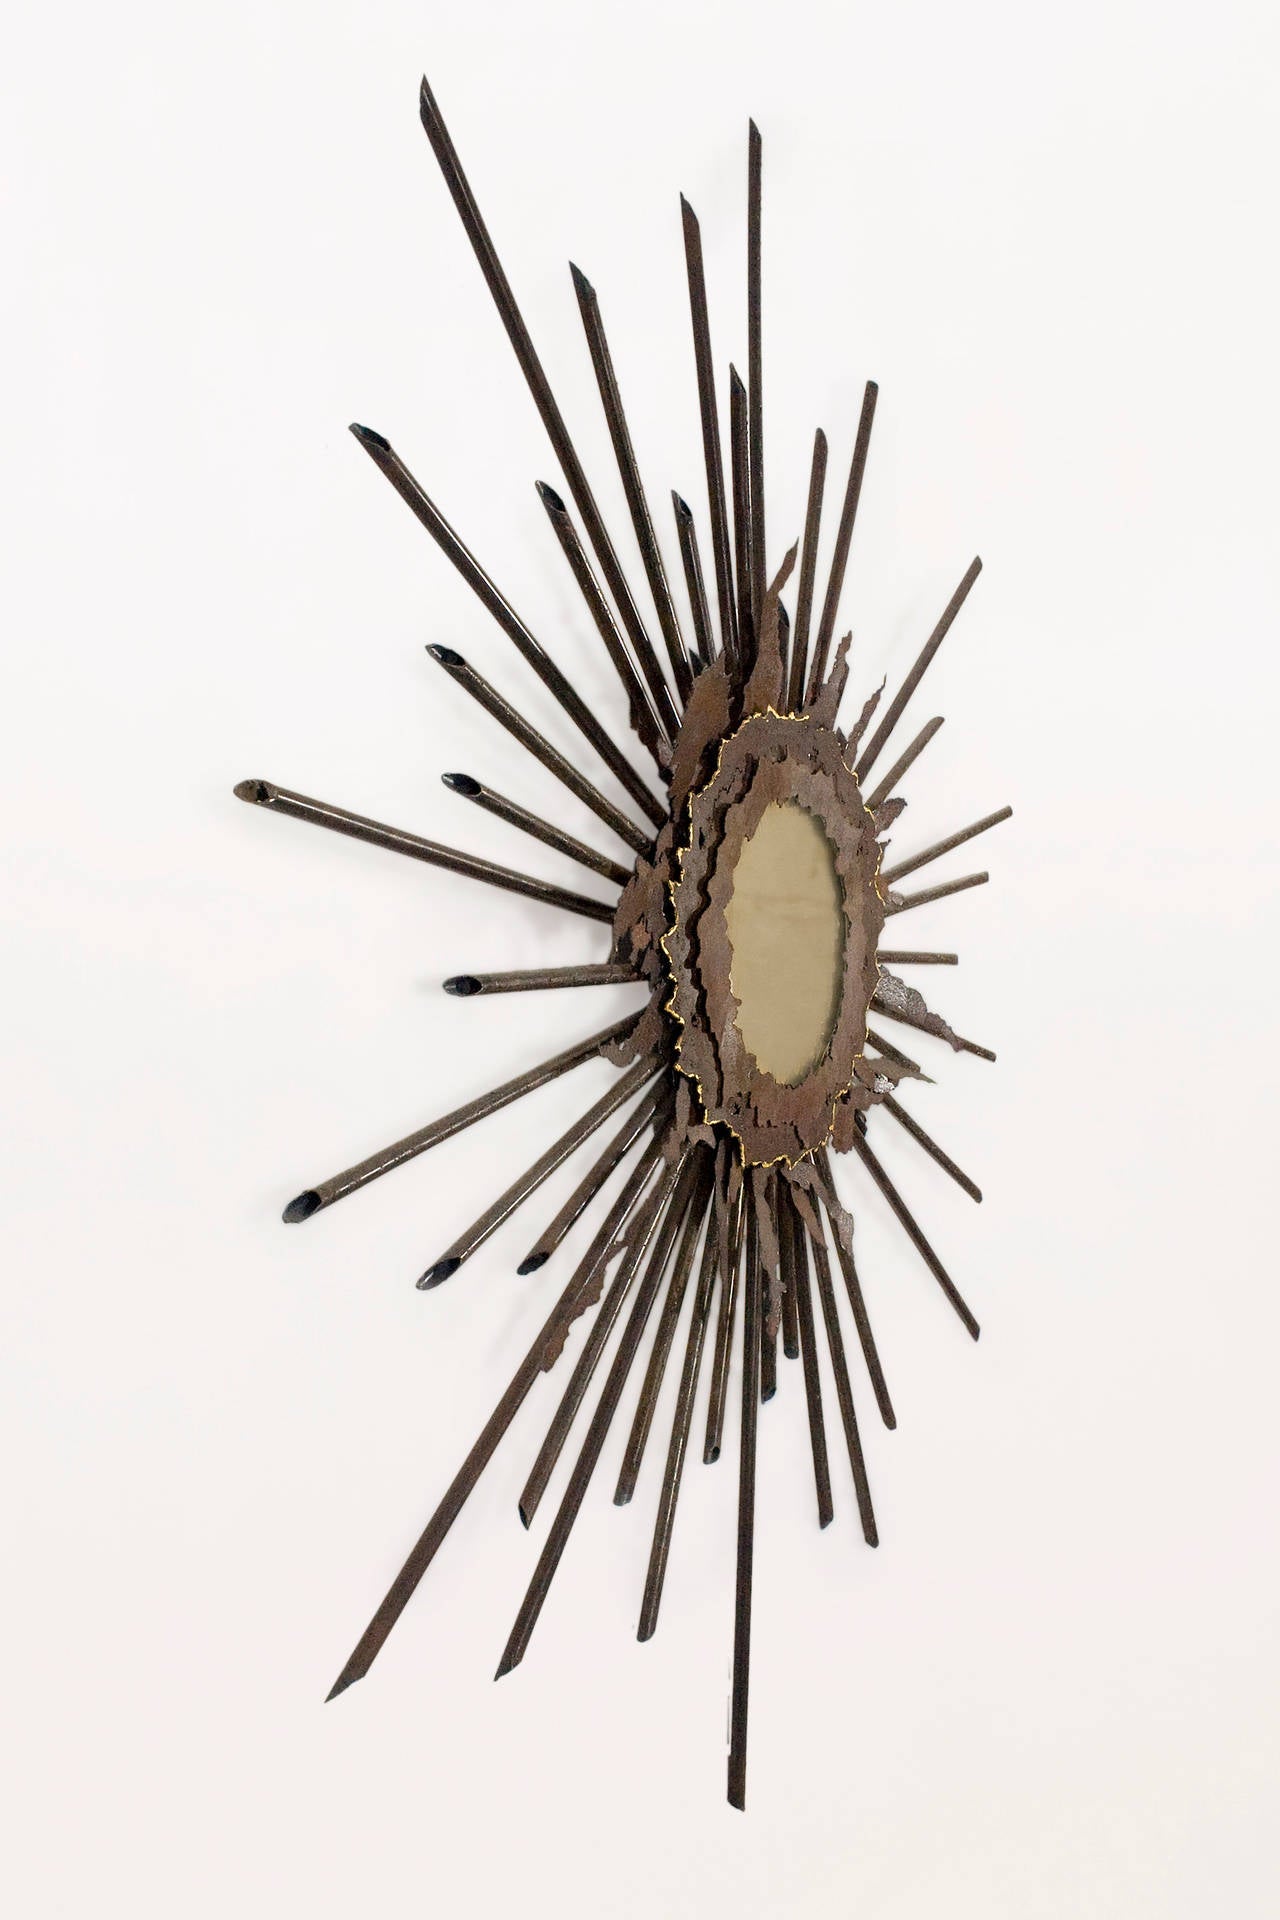 Brutalist Sunburst Mirror Made by the Legendary Laure Baudet
Forged & Cut Iron and Mirror
Circa 1990, France
Excellent Condition